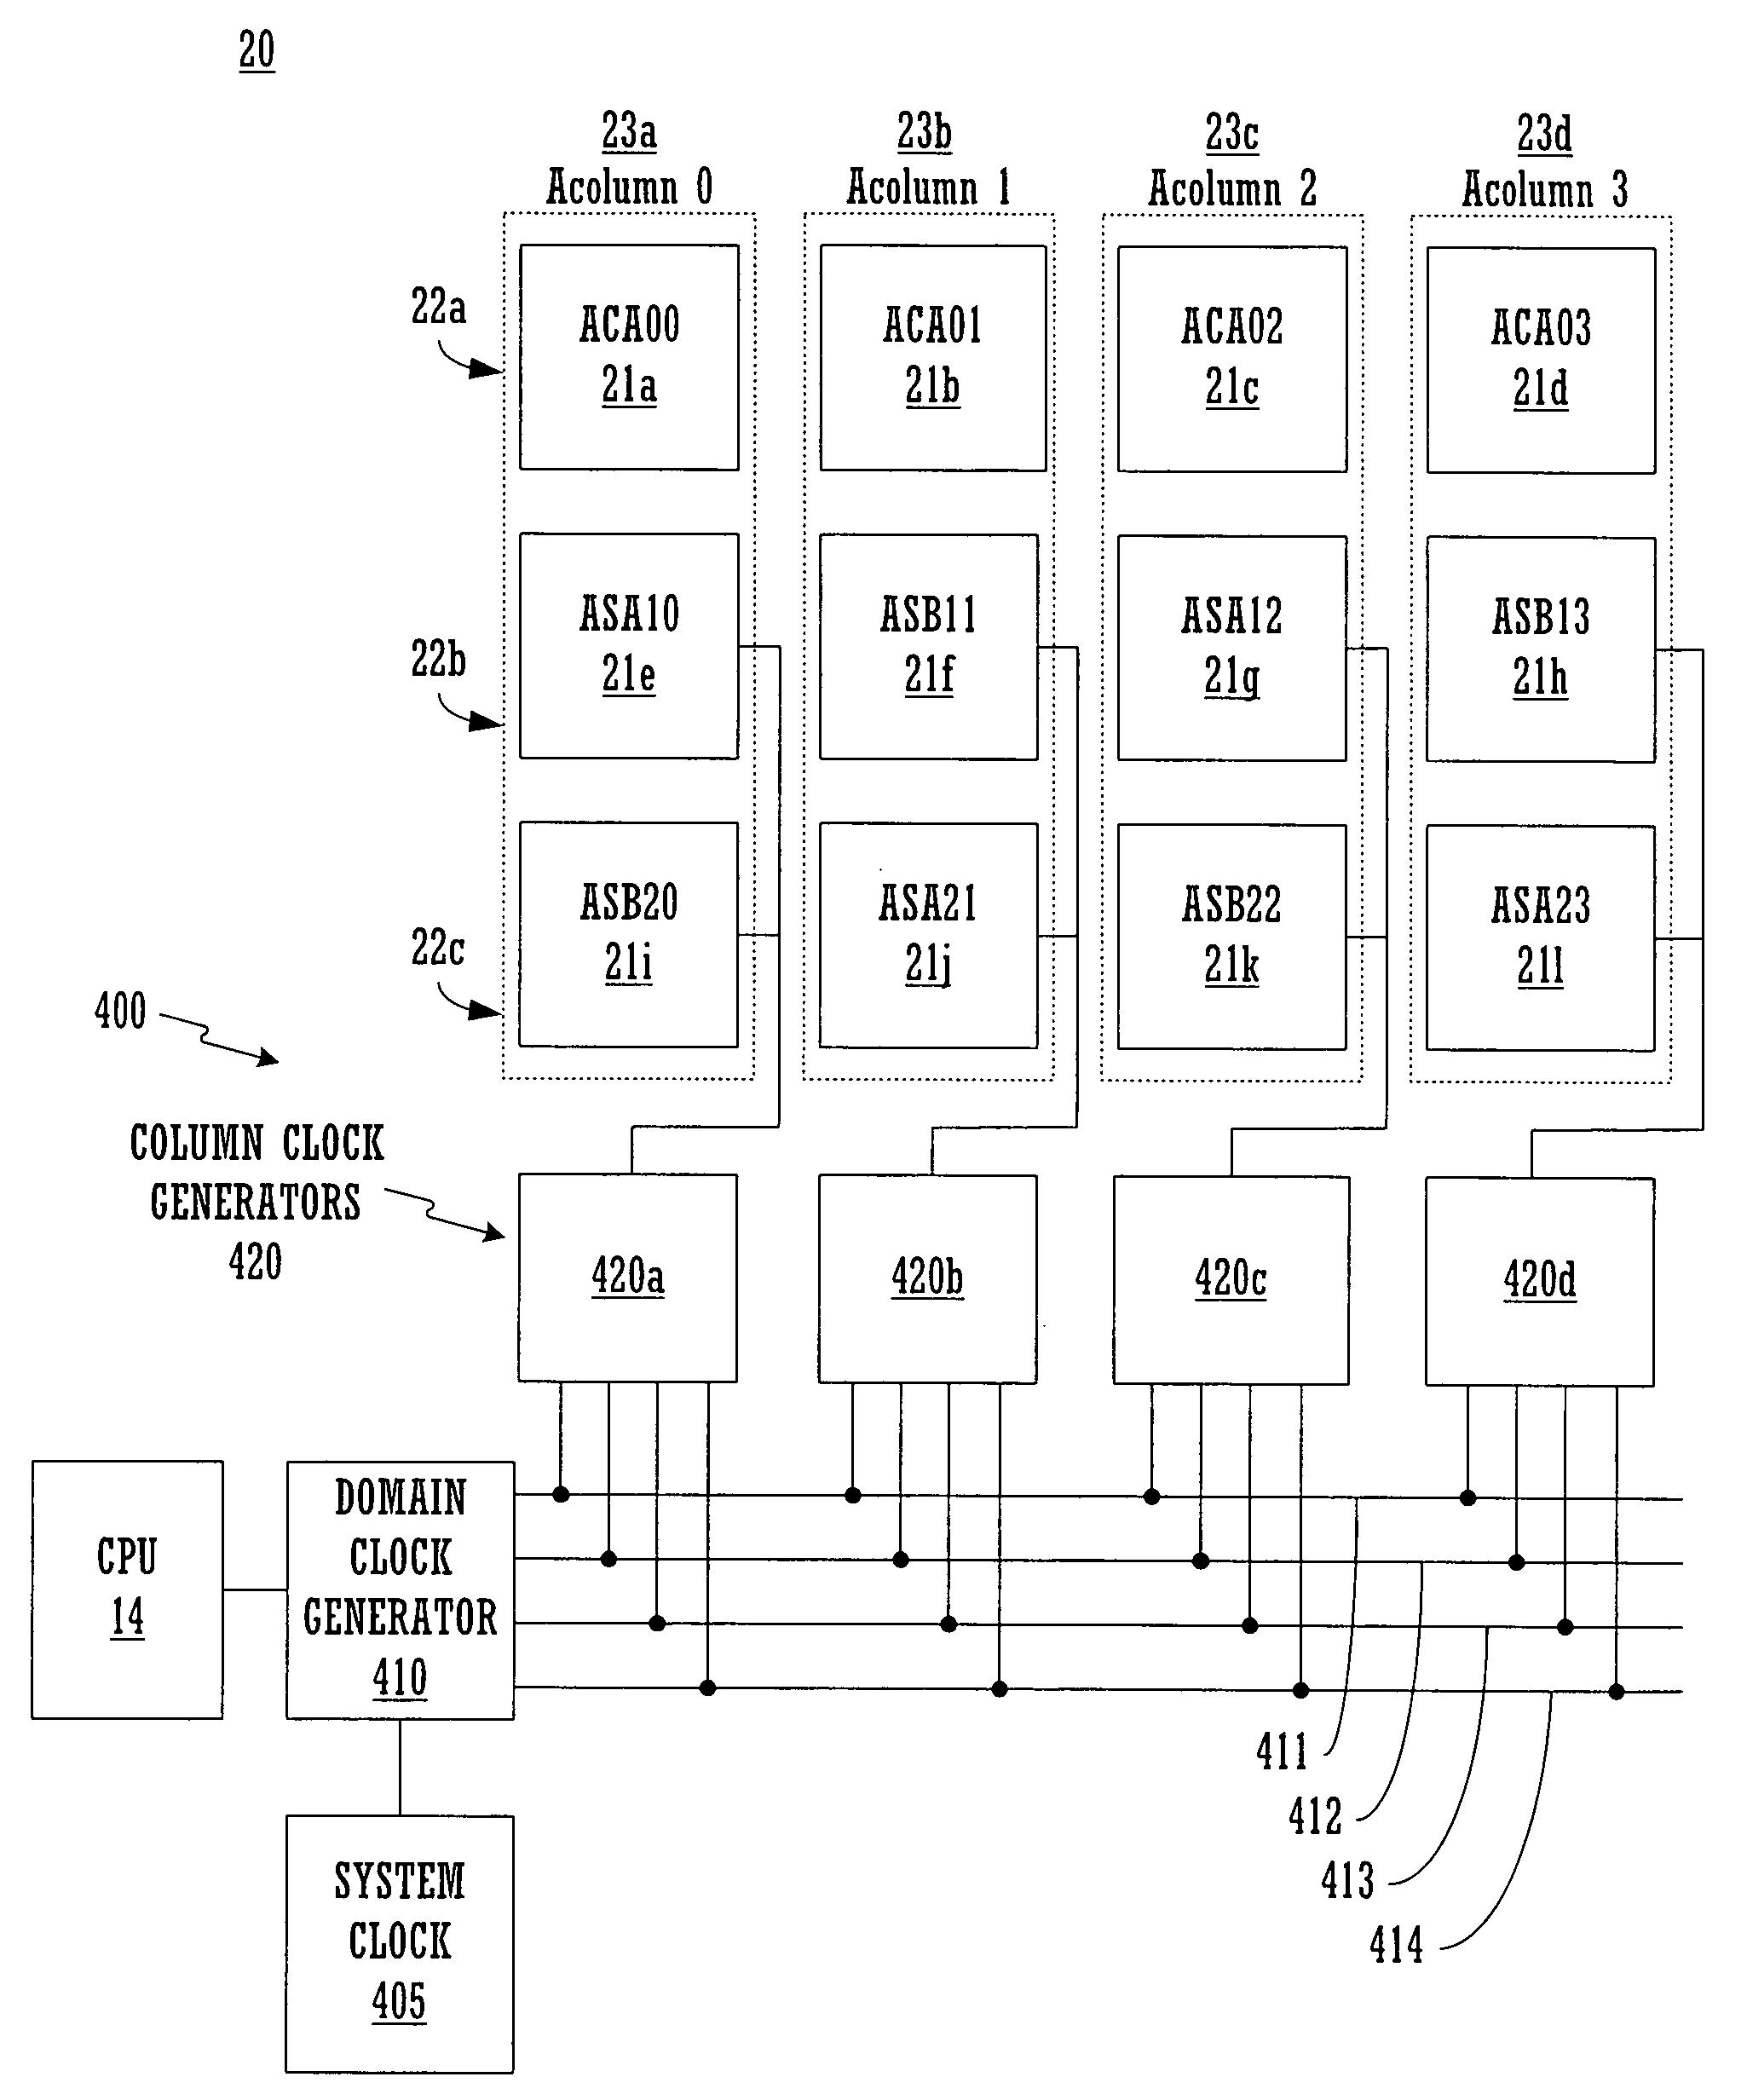 Architecture for synchronizing and resetting clock signals supplied to multiple programmable analog blocks